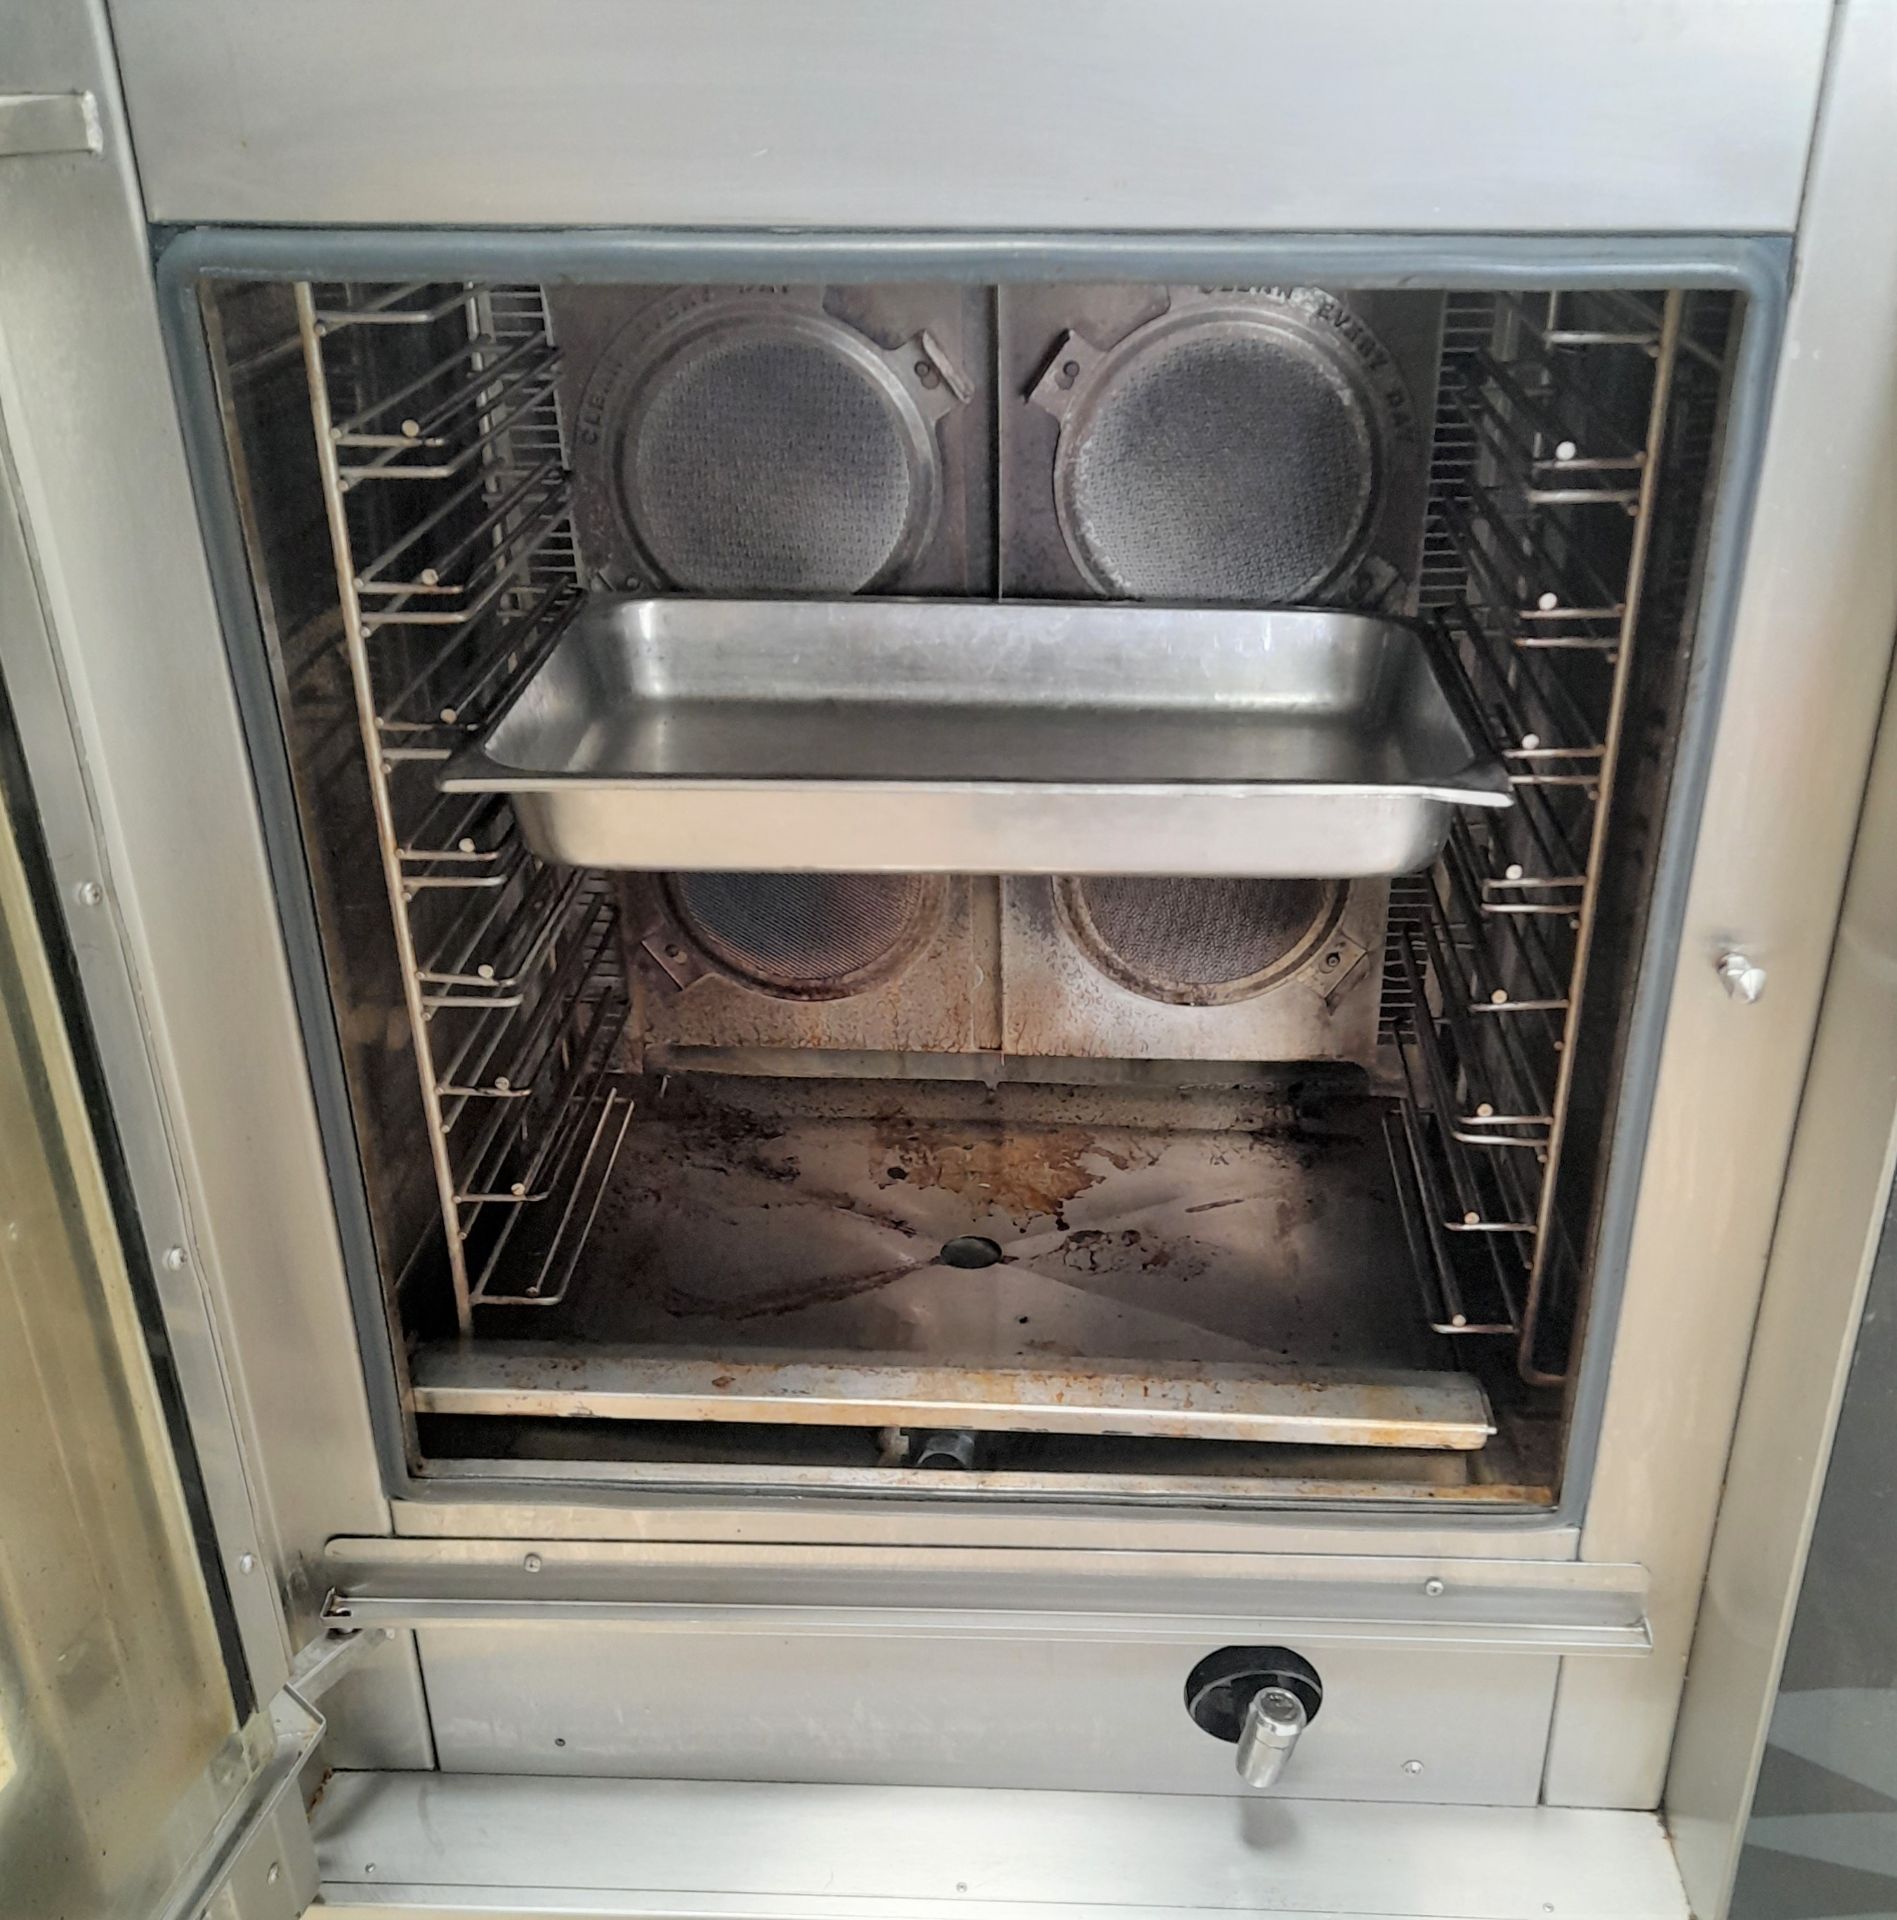 1 x Fri-Jado Turbo Retail 8 Grid Combi Oven - 3 Phase Combi Oven With Various Cooking Programs - Image 8 of 24